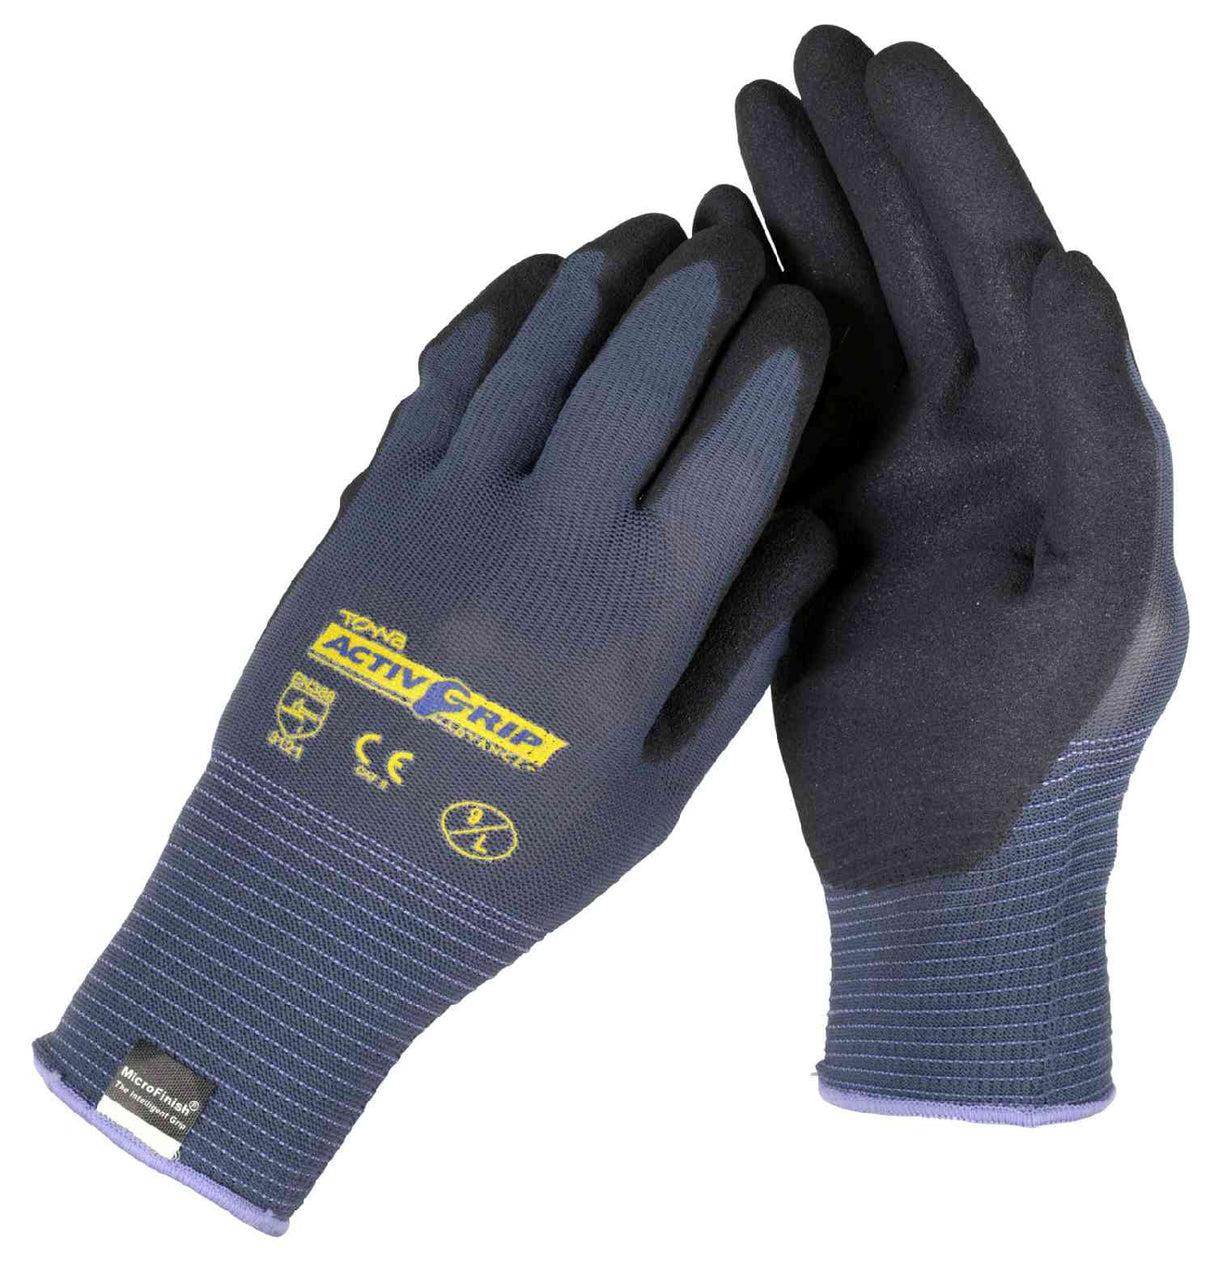 Towa ActivGrip Advance 581 Work Gloves Nitrile Palm Coated Size 7